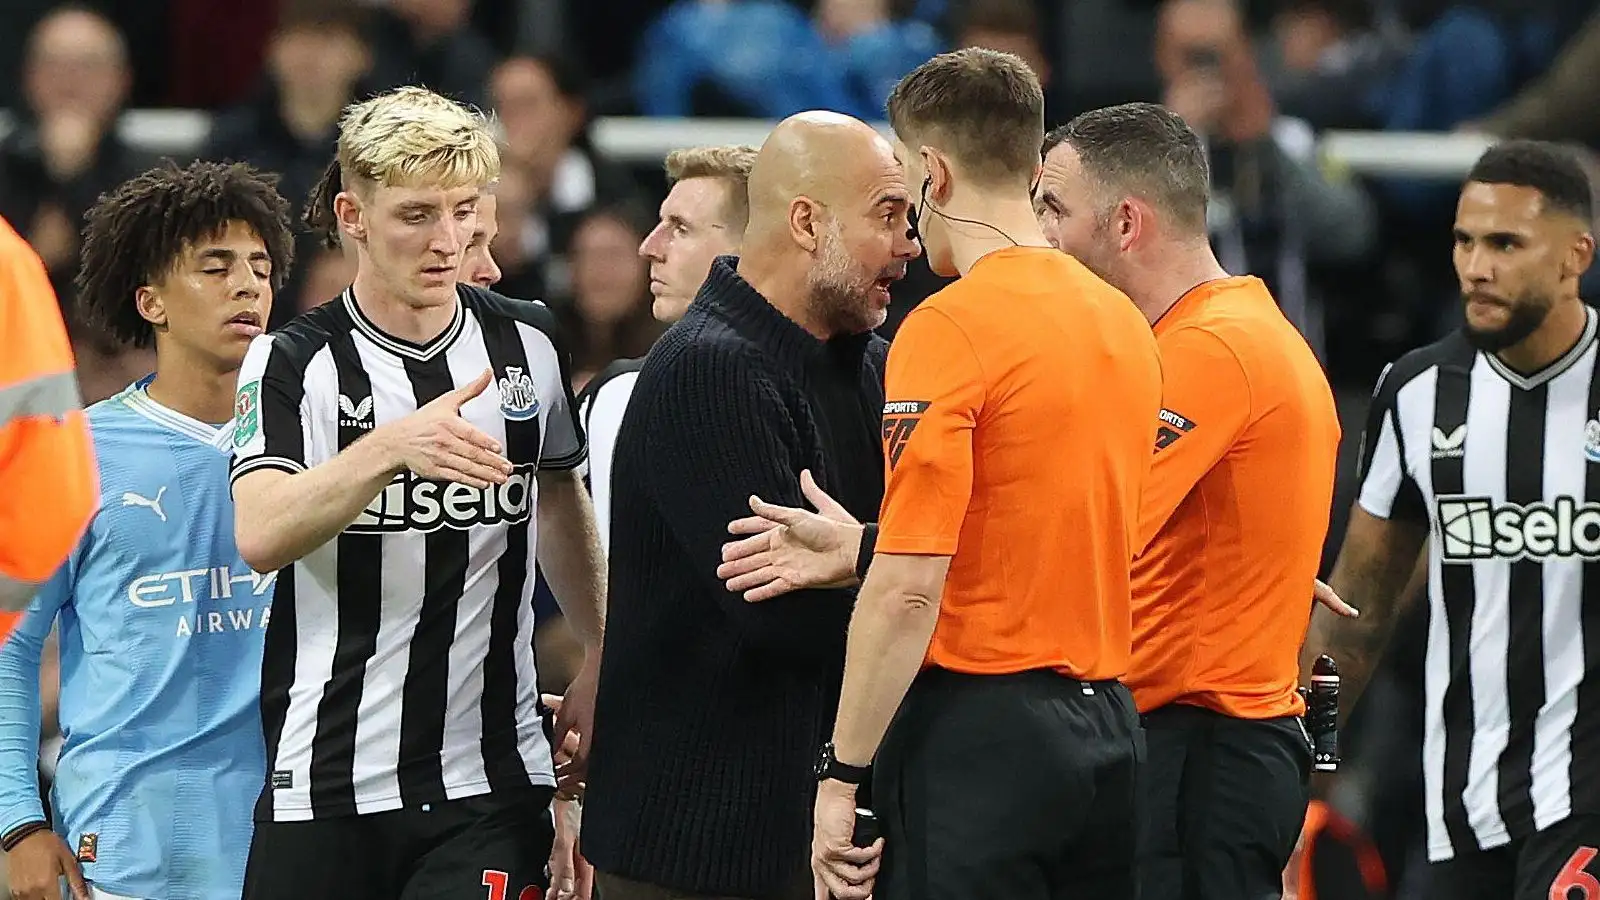 Manchester City manager Pep Guardiola debates with the referees